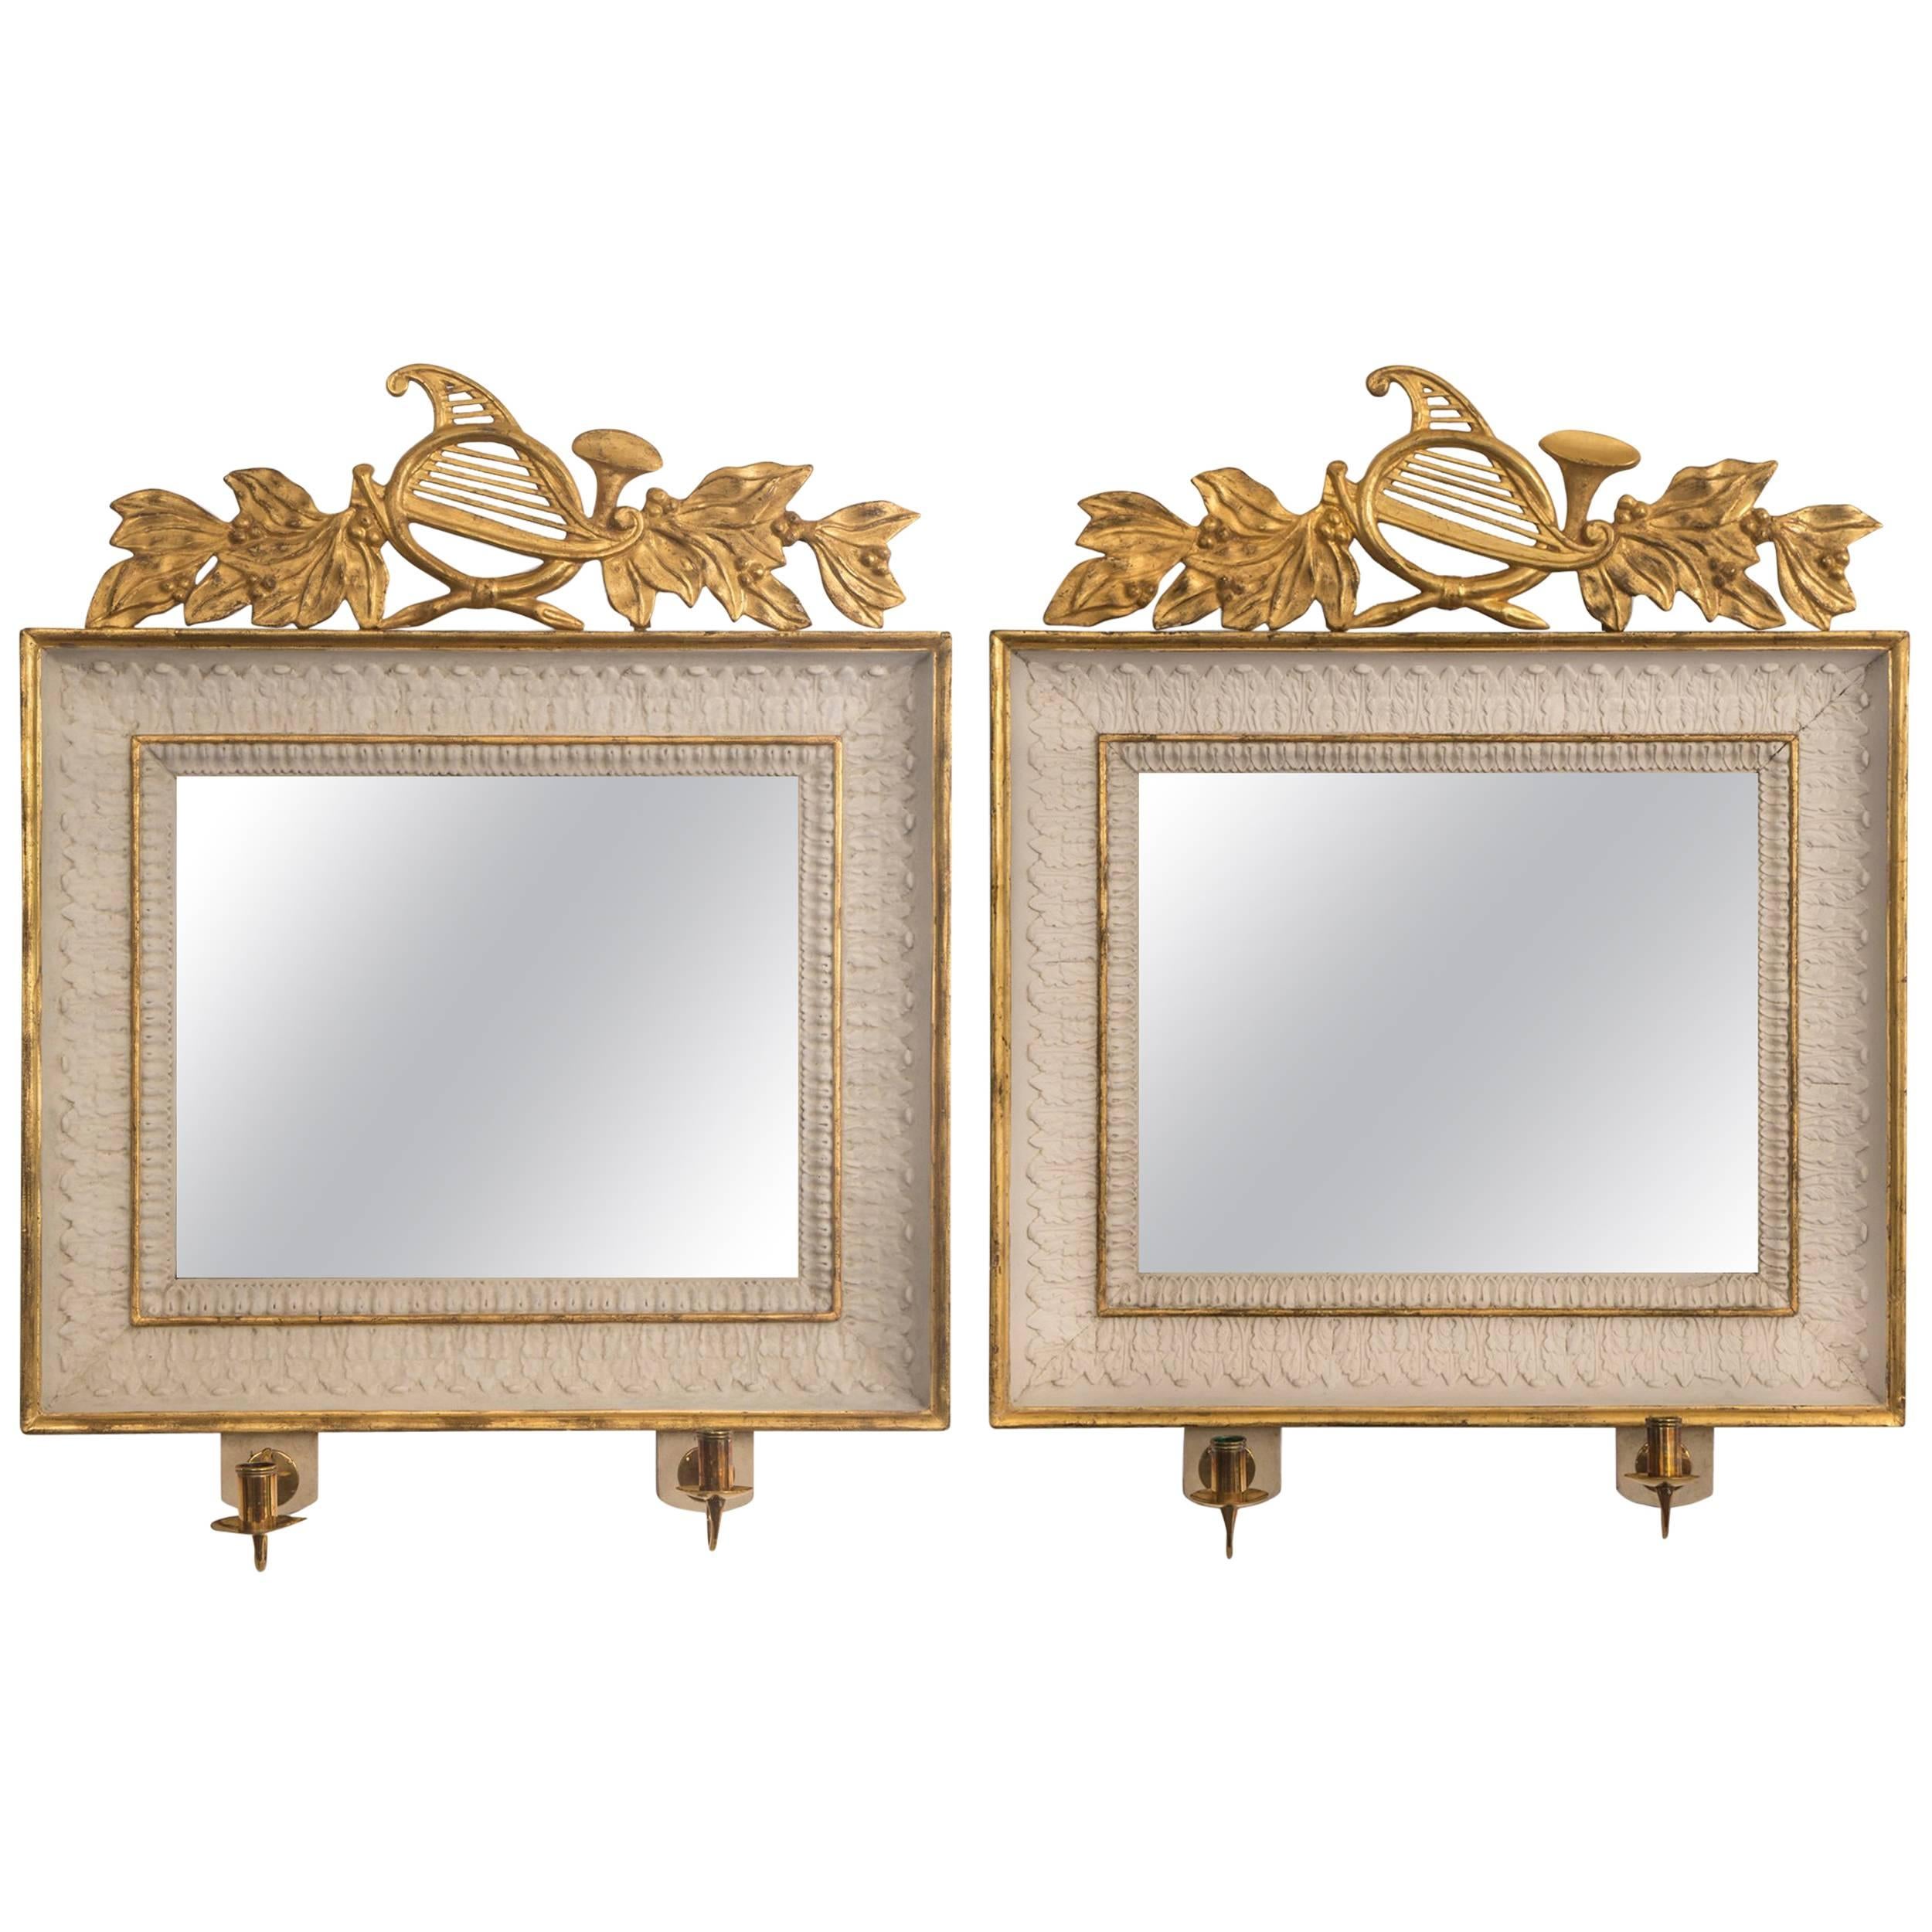 Pair of Swedish Empire Period Painted and Parcel-Gilt Wood Rectangular Mirrors For Sale